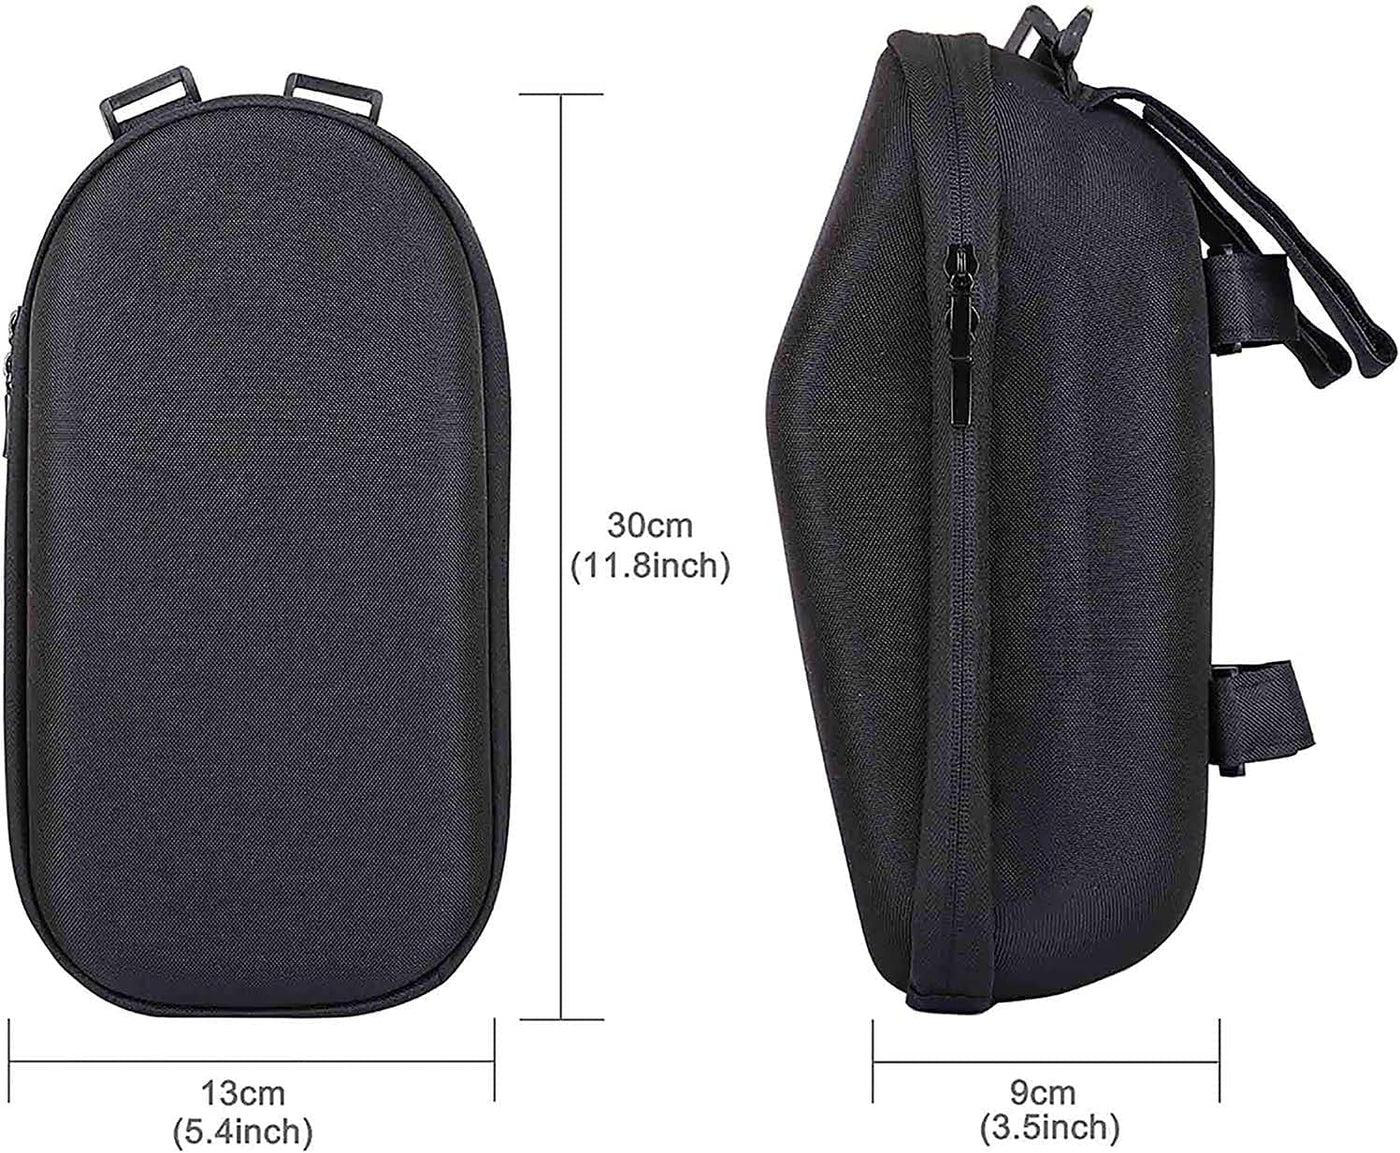 Dubkart Bags Electric Scooter Handlebar Storage Bag Pouch